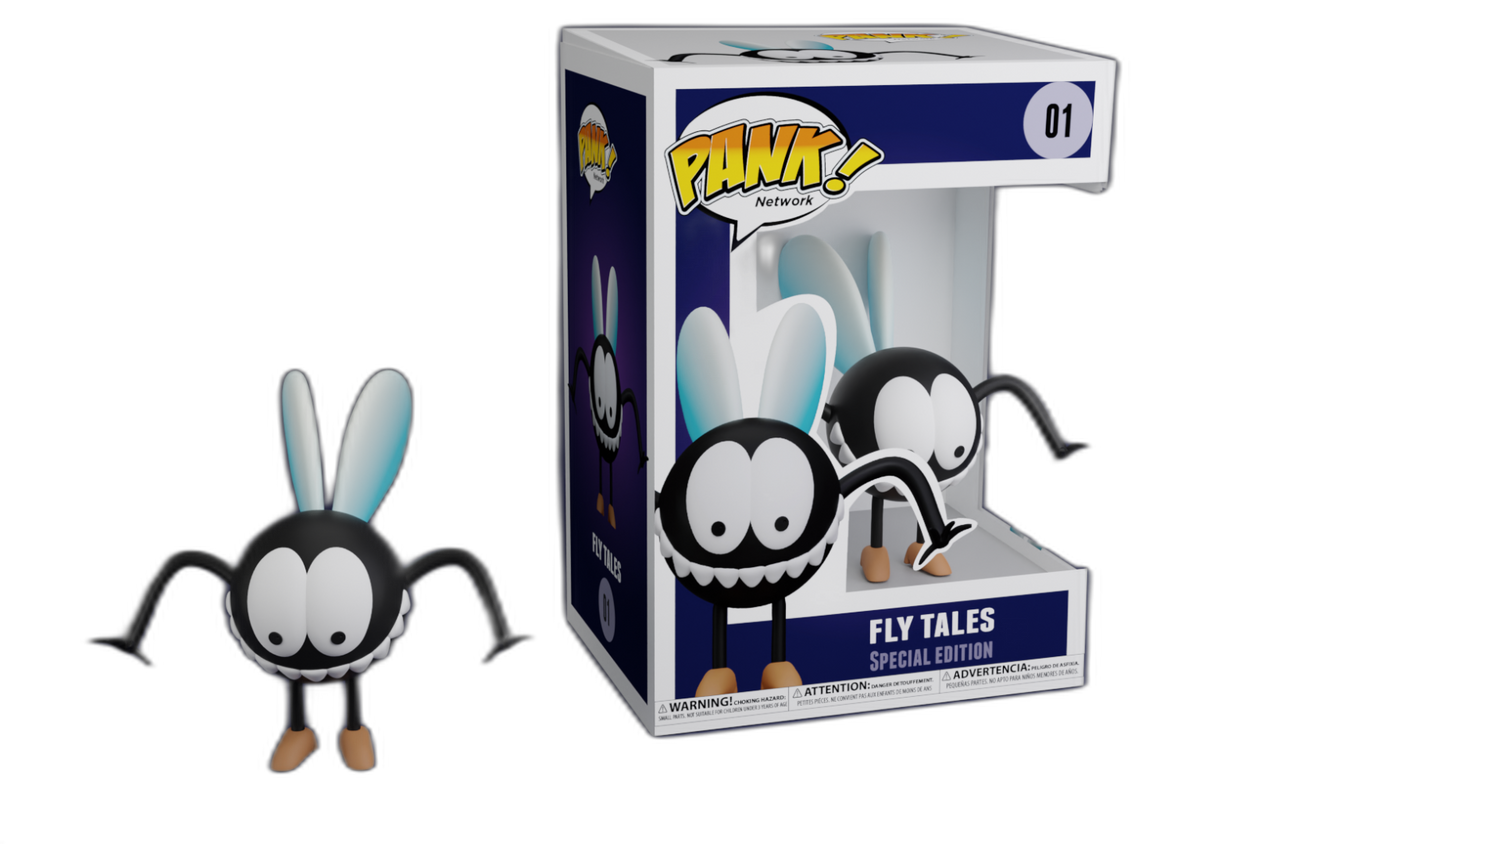 Pank Network! Fly Tales - Limited Edition